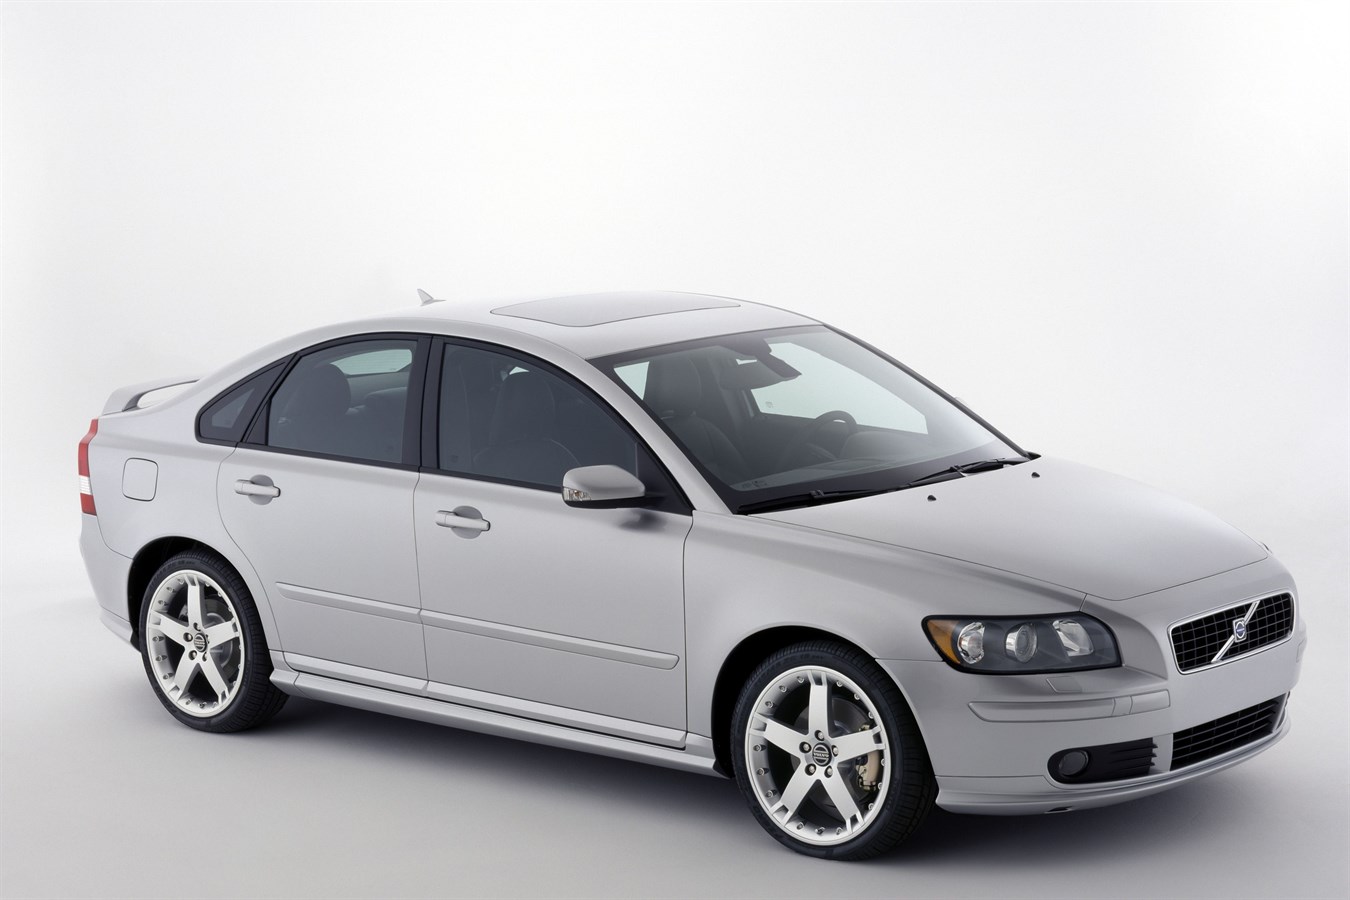 Volvo Announces Pricing for the all-new 2005 S40 - Volvo Car USA Newsroom